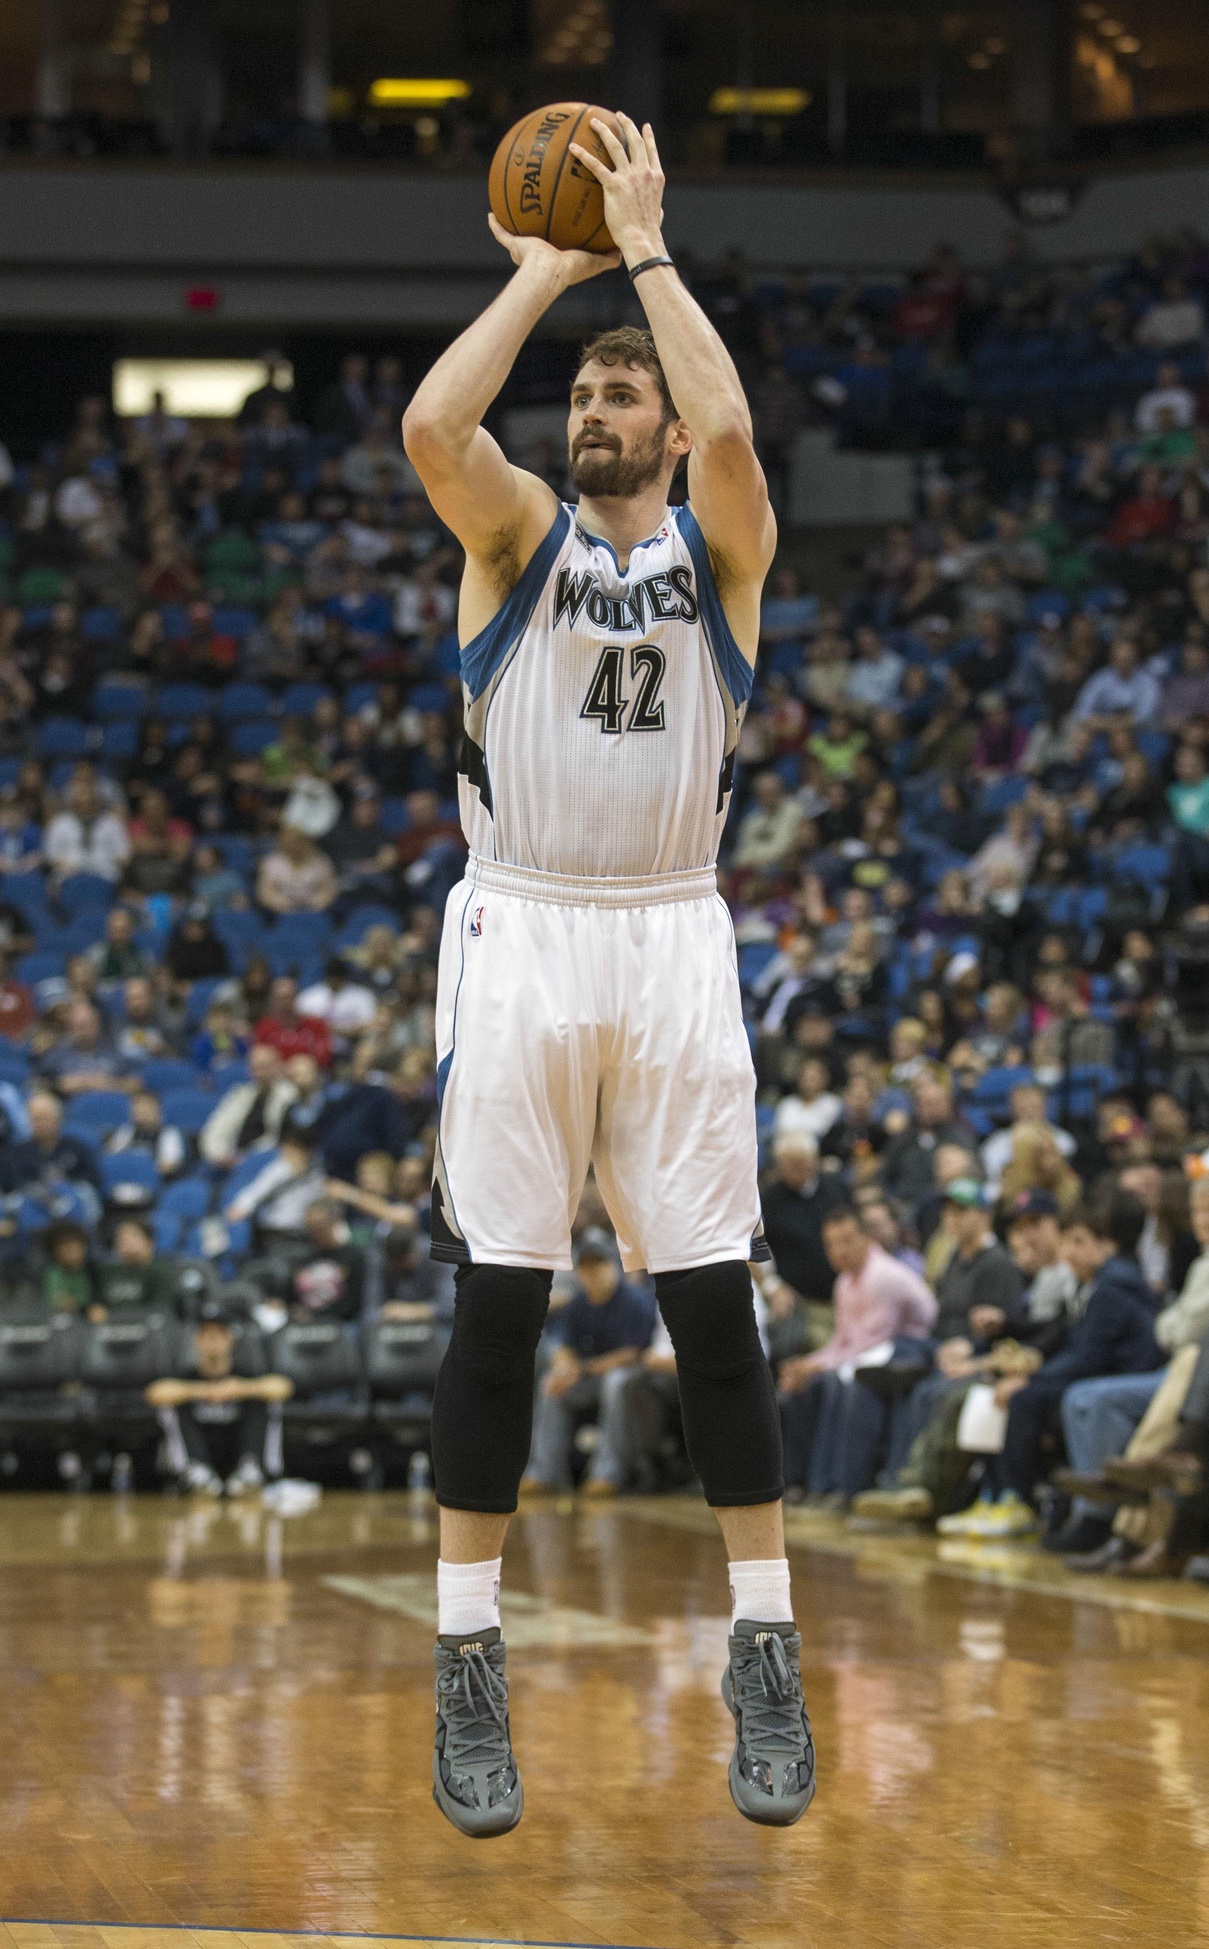 Can Kevin Love sneak his way onto the All-NBA Team? Photo by Jesse Johnson, USA Today Sports Images.